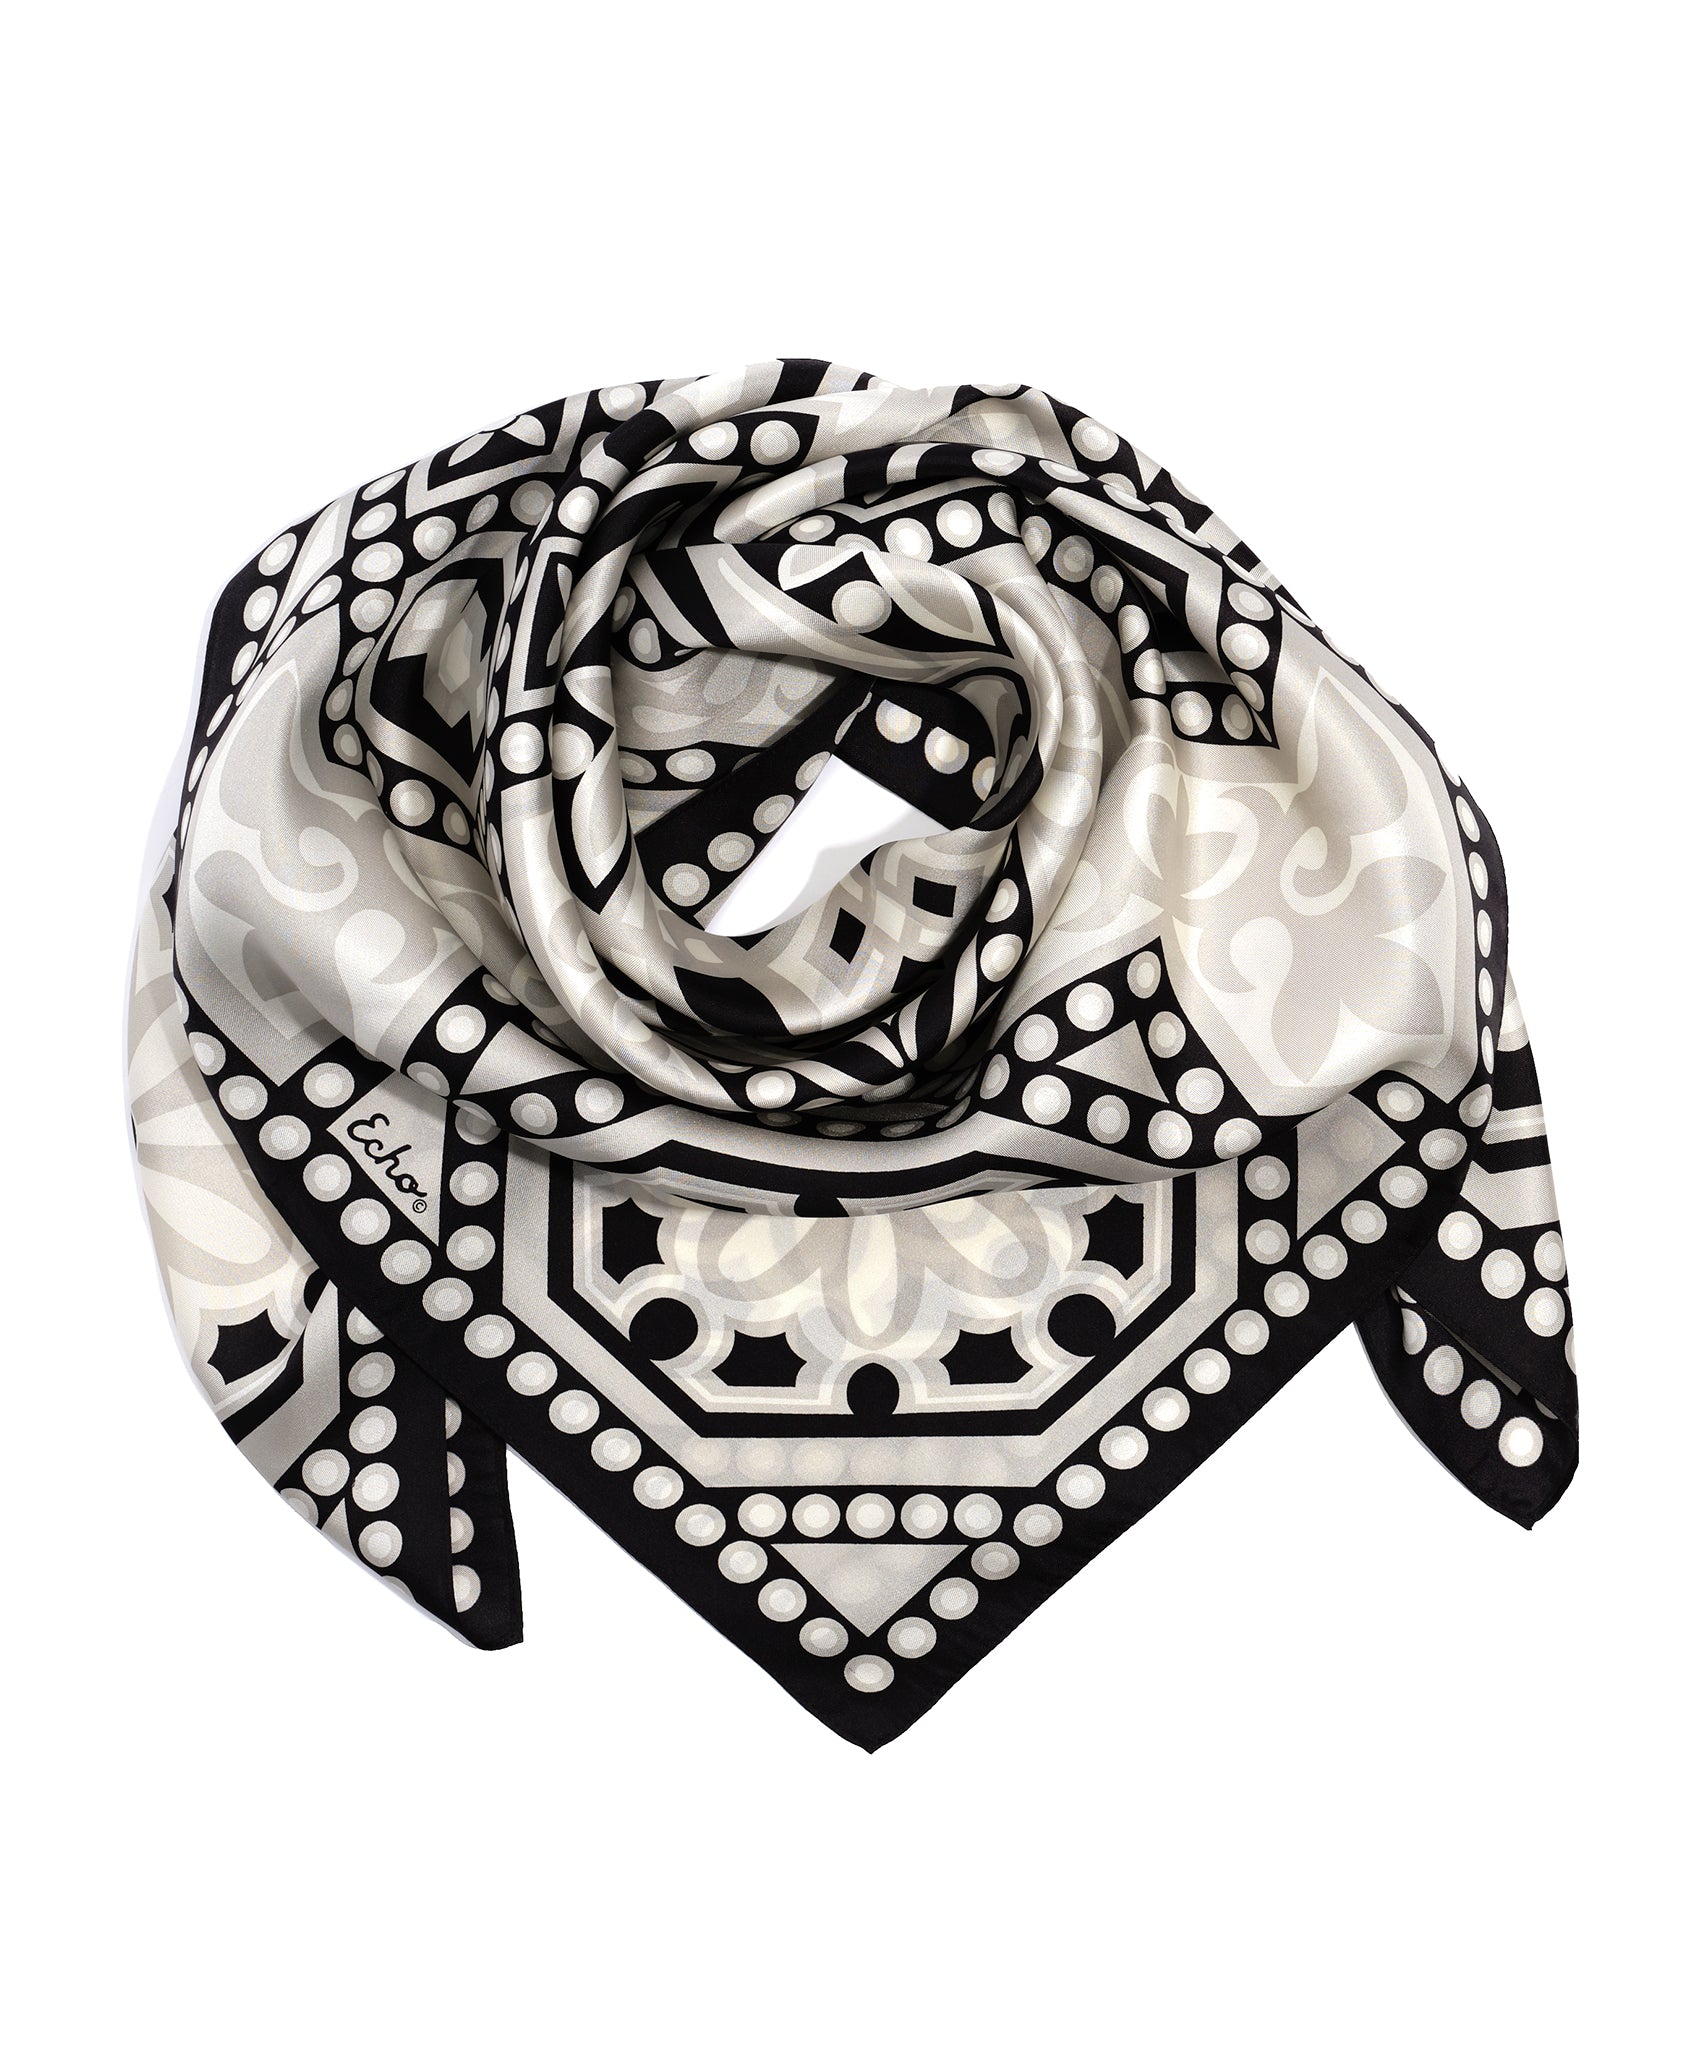 The Marquee 35" Silk Square Scarf in Black